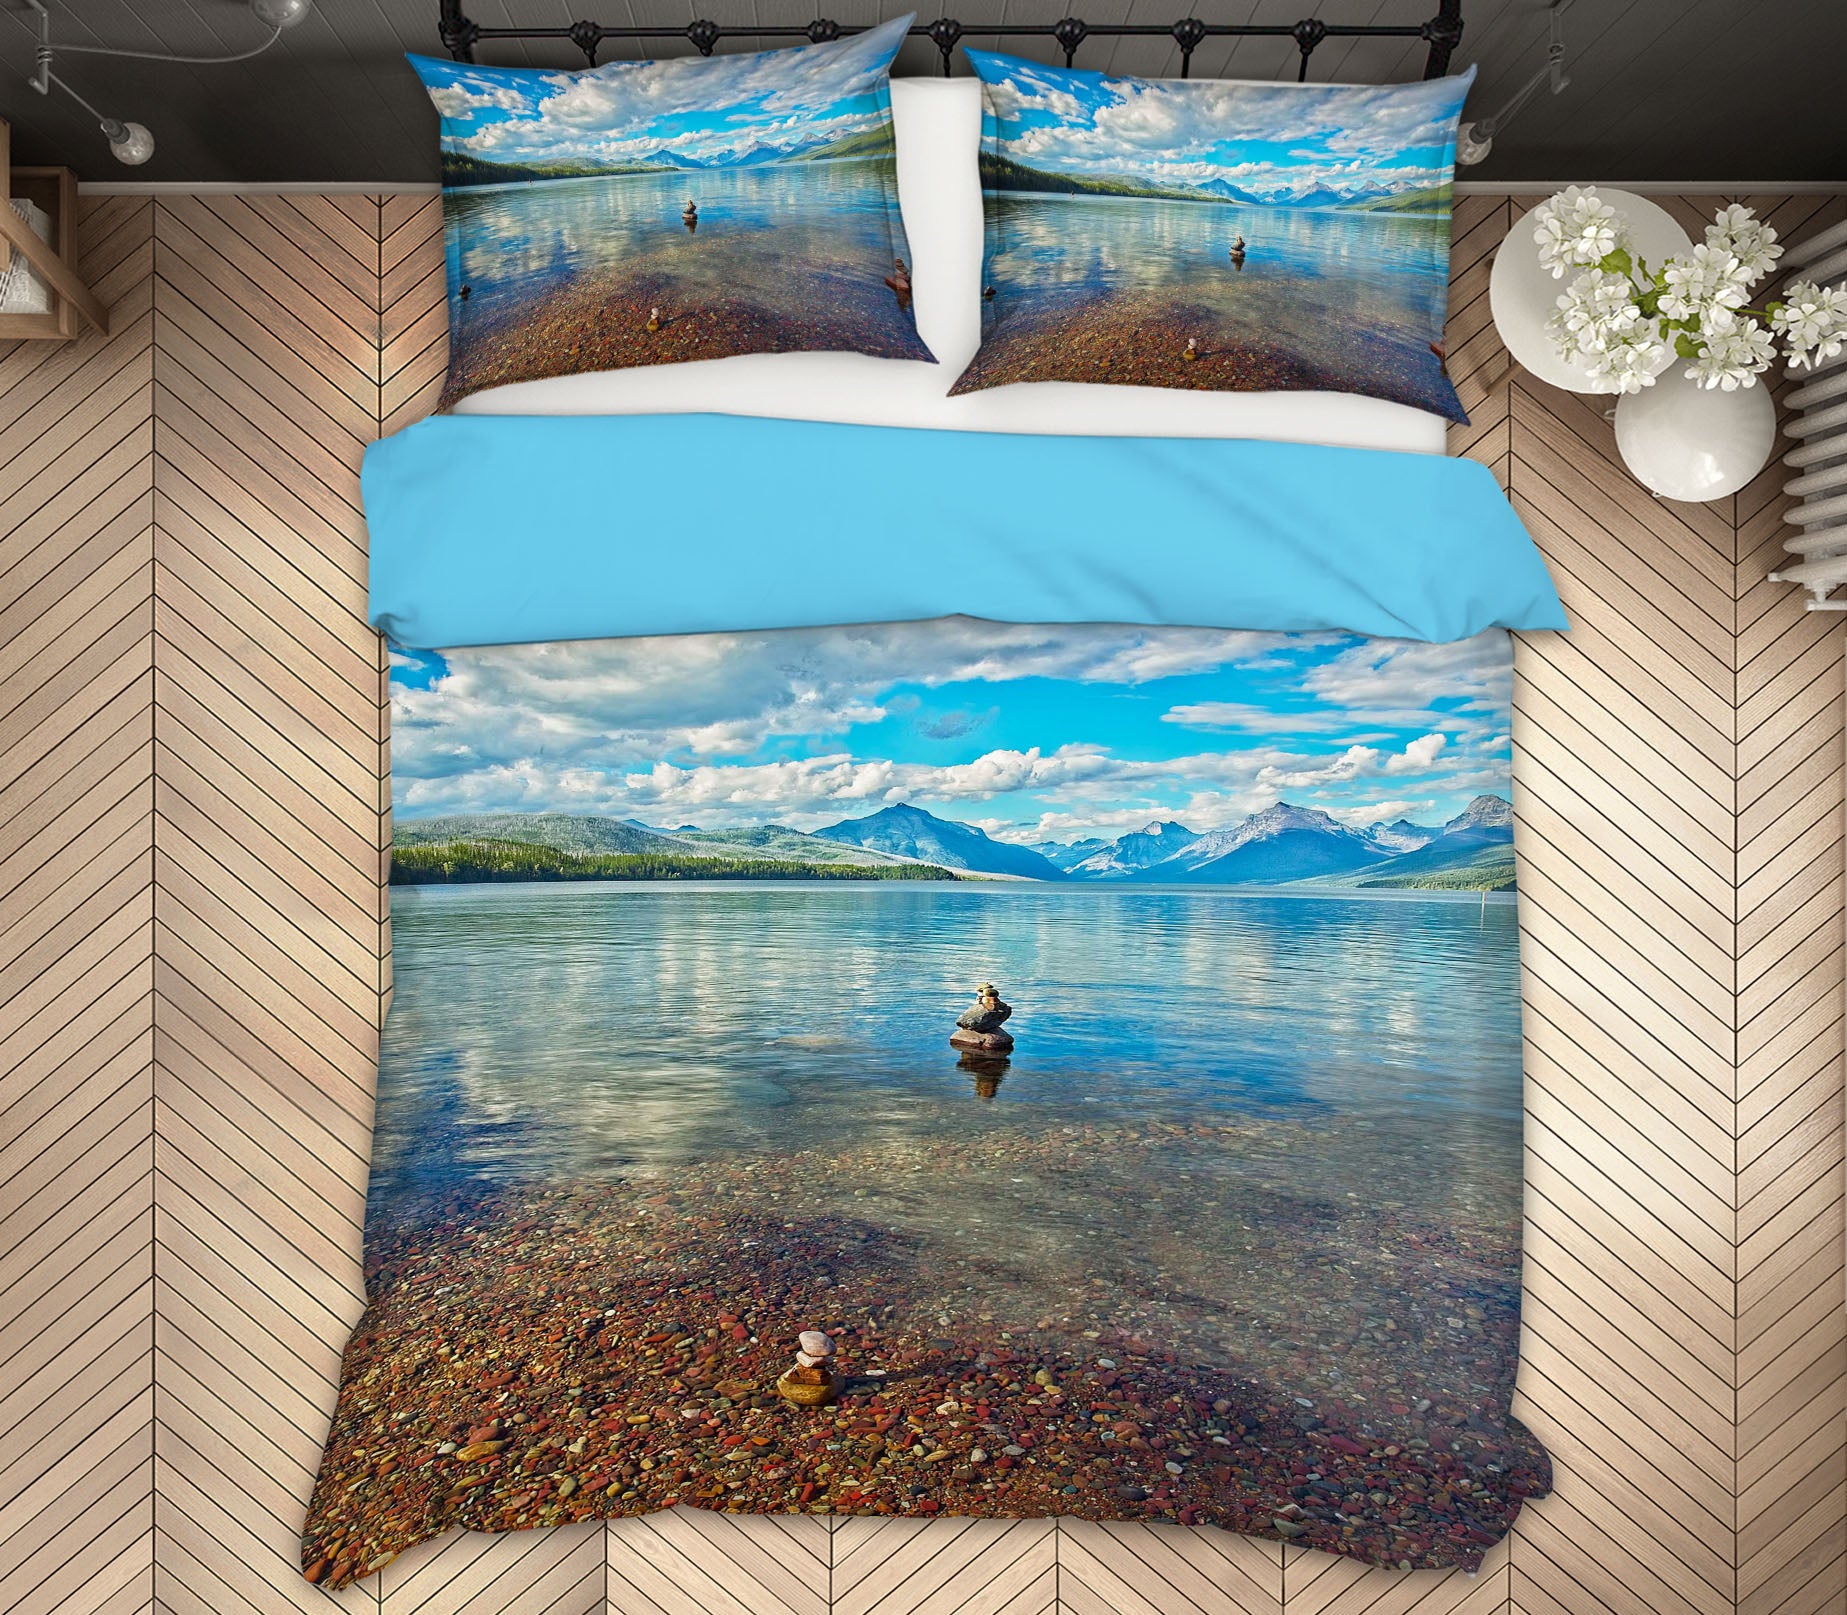 3D Clear Lake 2124 Kathy Barefield Bedding Bed Pillowcases Quilt